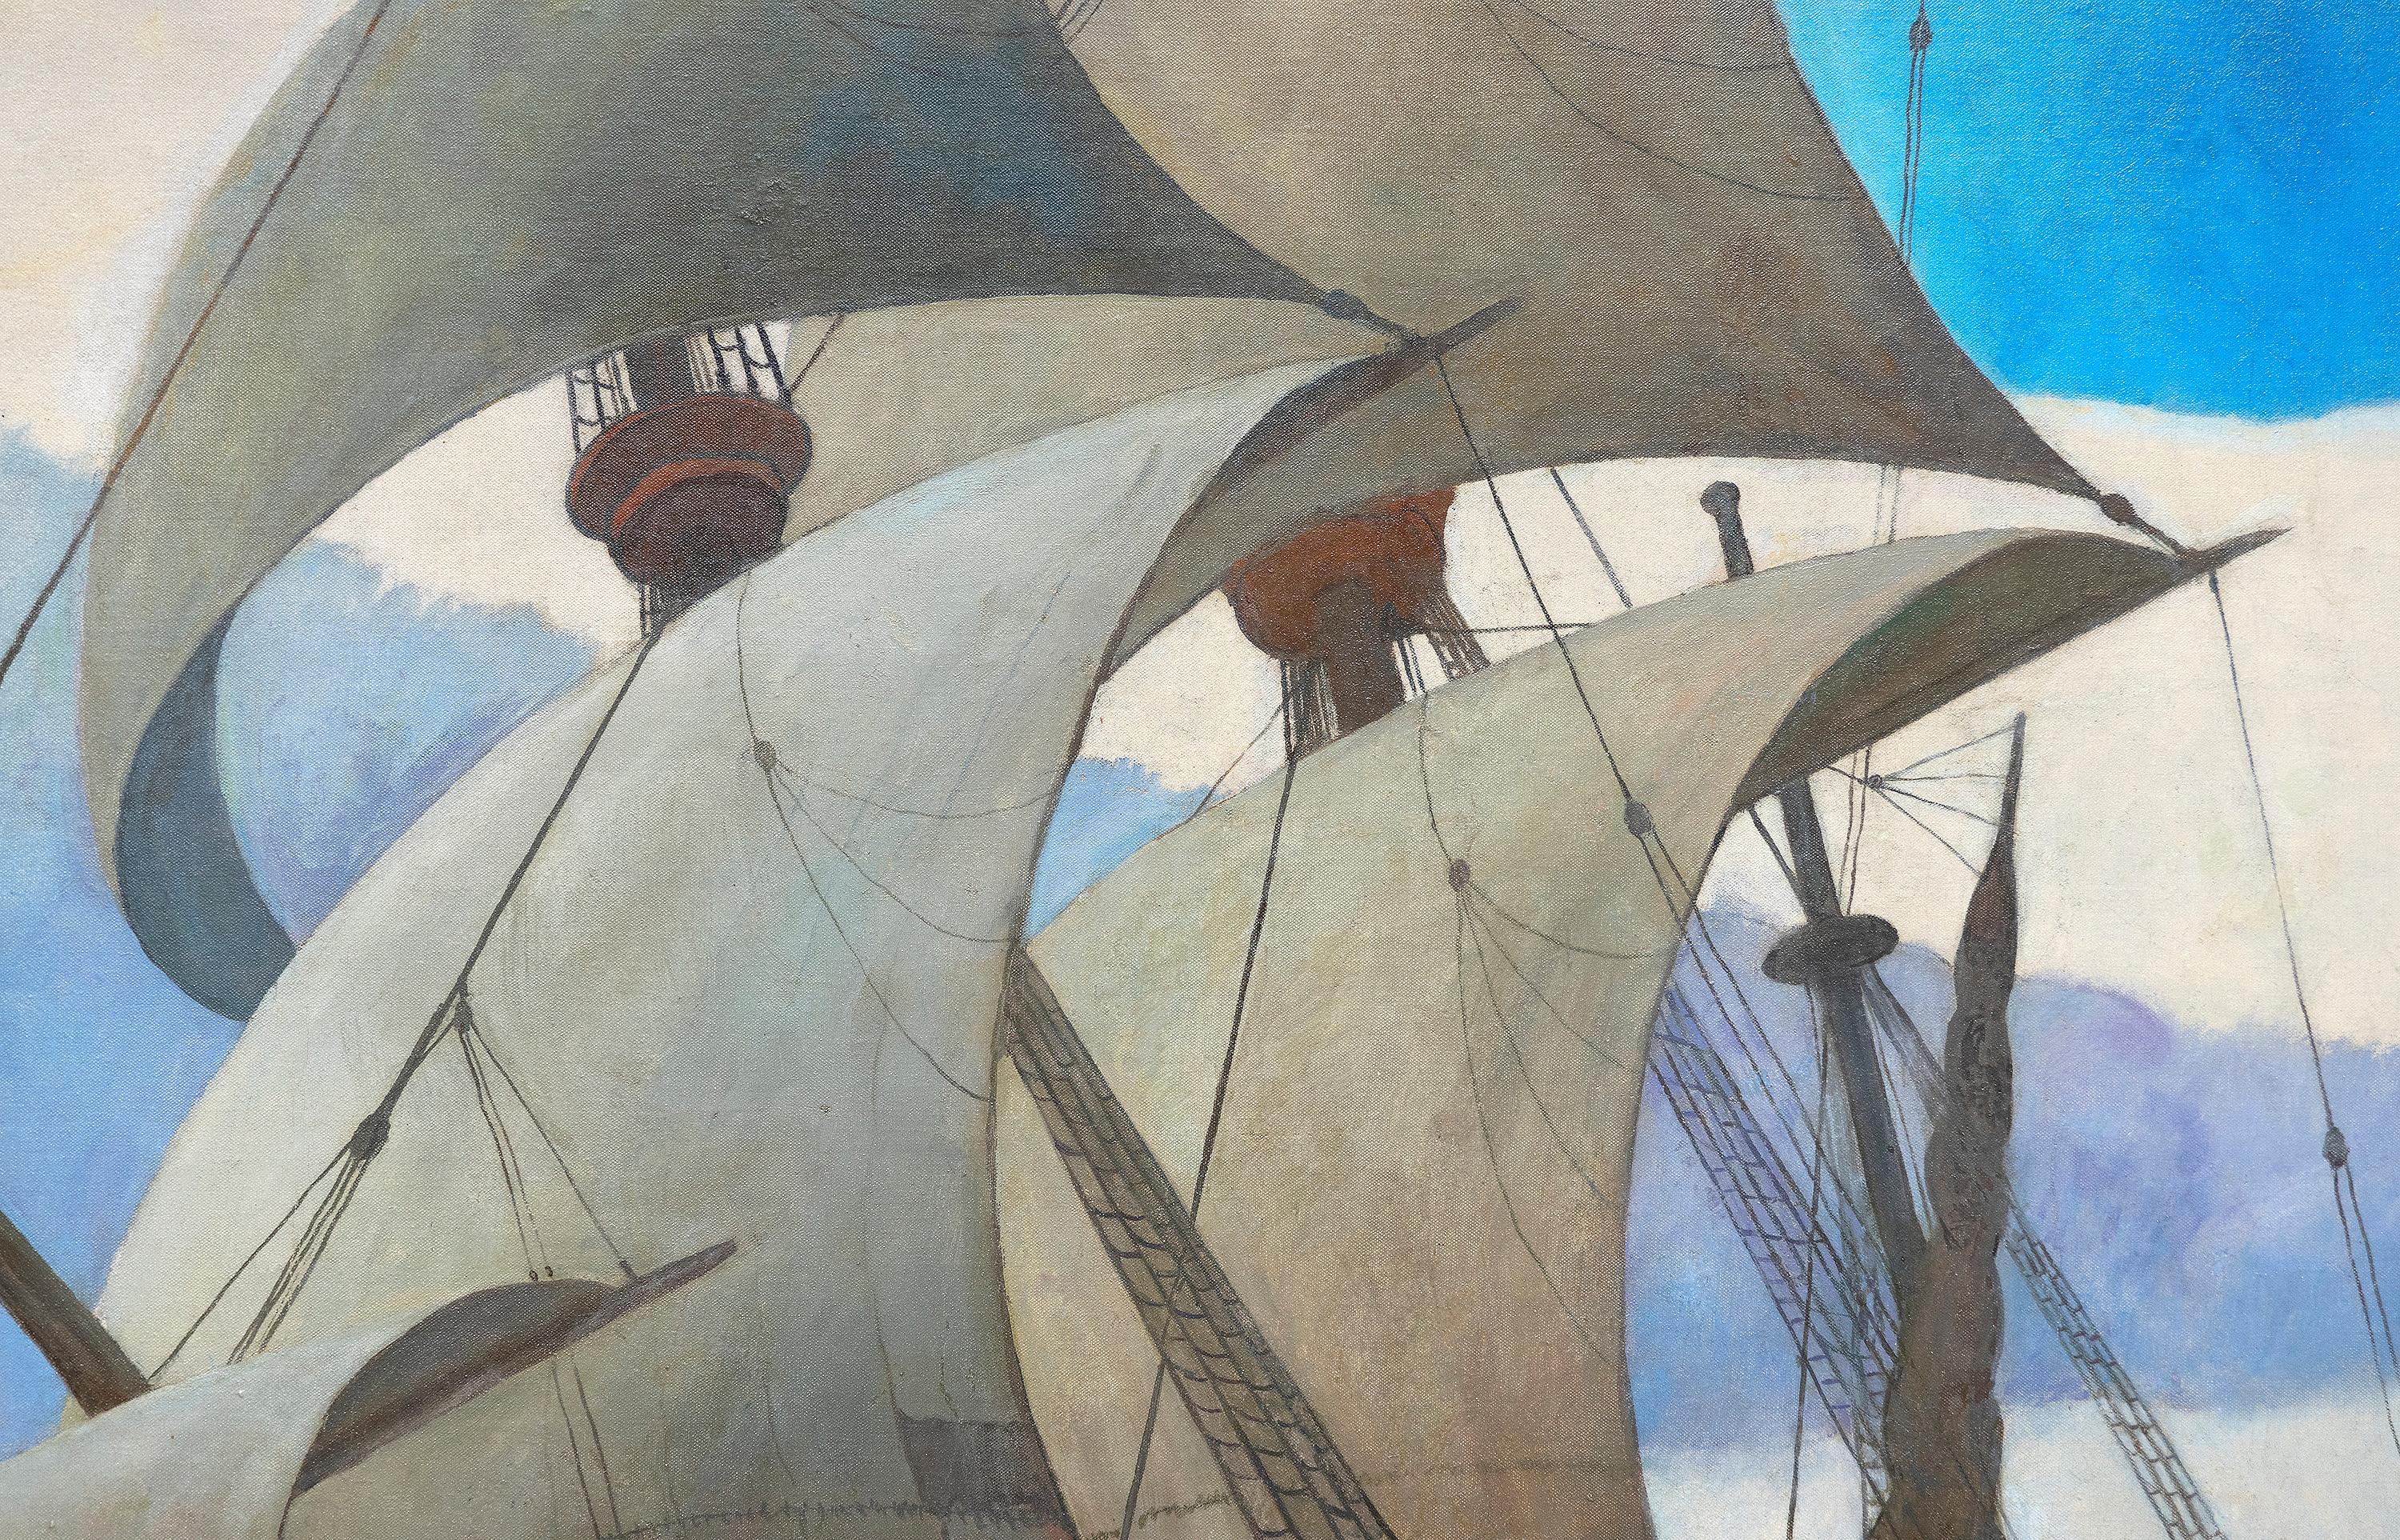 The Coming of the Mayflower in 1620 - Blue Landscape Painting by Newell Convers Wyeth